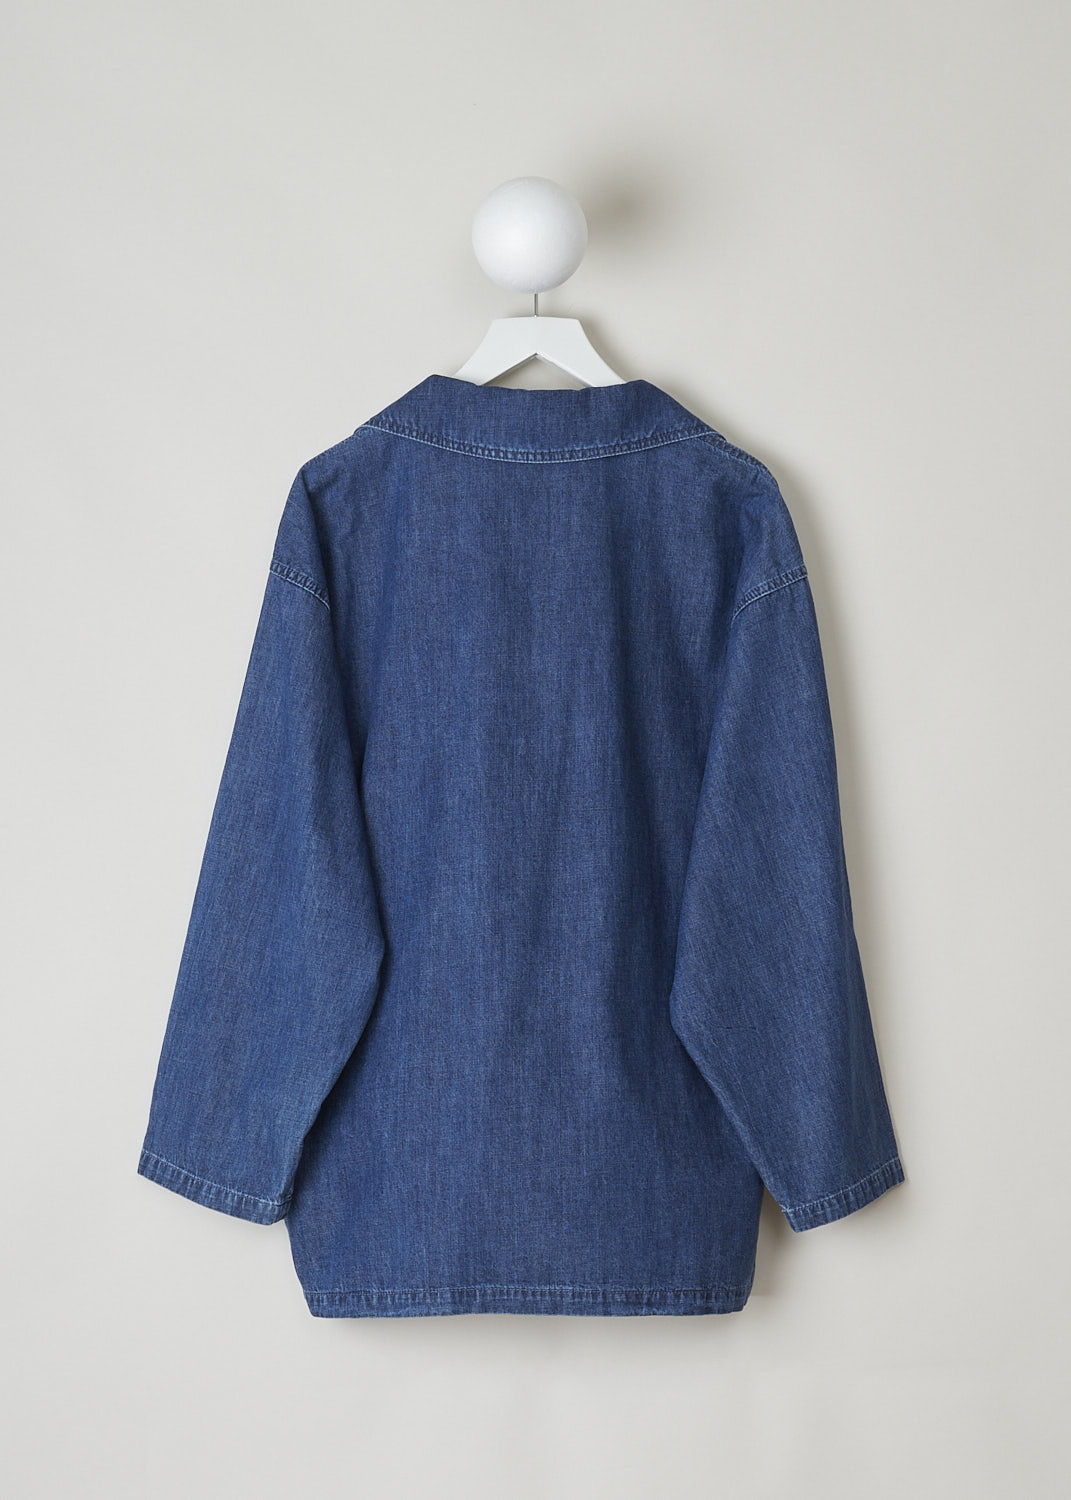 VALENTINO, DARK WASH DENIM TOP WITH DEEP V, 2B3DB01Z7MR_558, Blue, Back, This wide long sleeve top in a dark wash jean fabric has a spread collar with a deep V-neckline. The end of the V-neck is decorated with the brands signature V. Slanted pockets are concealed in the side seams. The top has a straight hemline. Small slits can be found on either side. 
